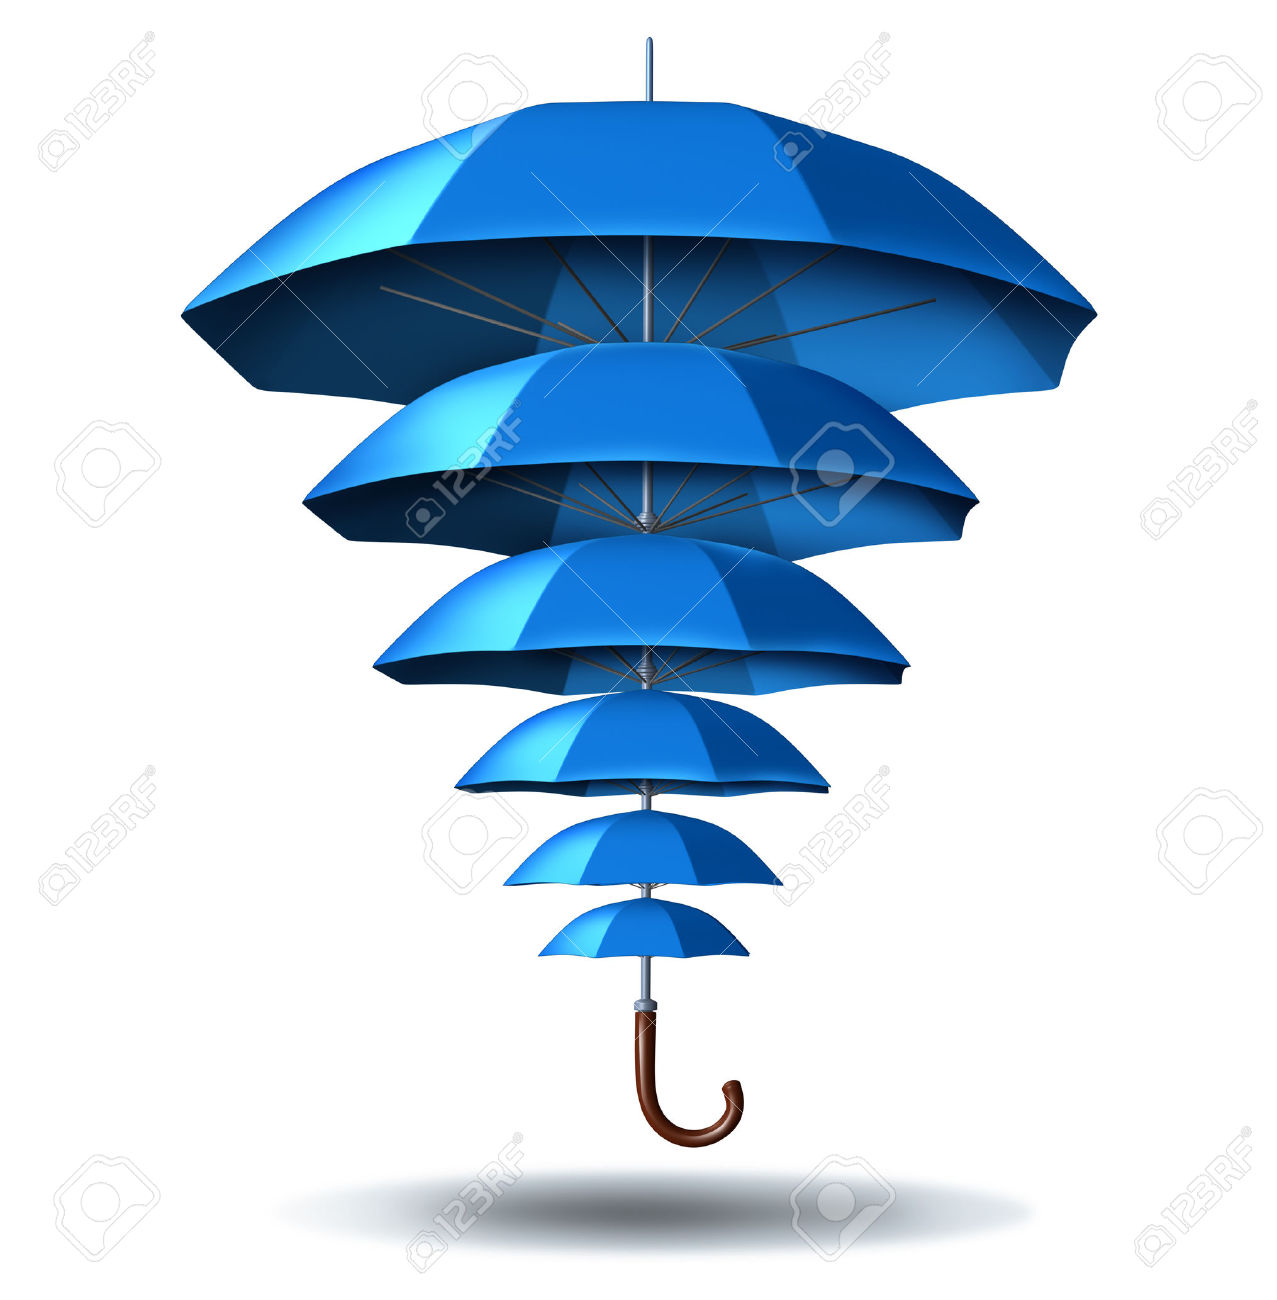 27658793-Increased-business-protection-and-growing-community-security-concept-with-a-blue-umbrella-metaphor-c-Stock-Photo